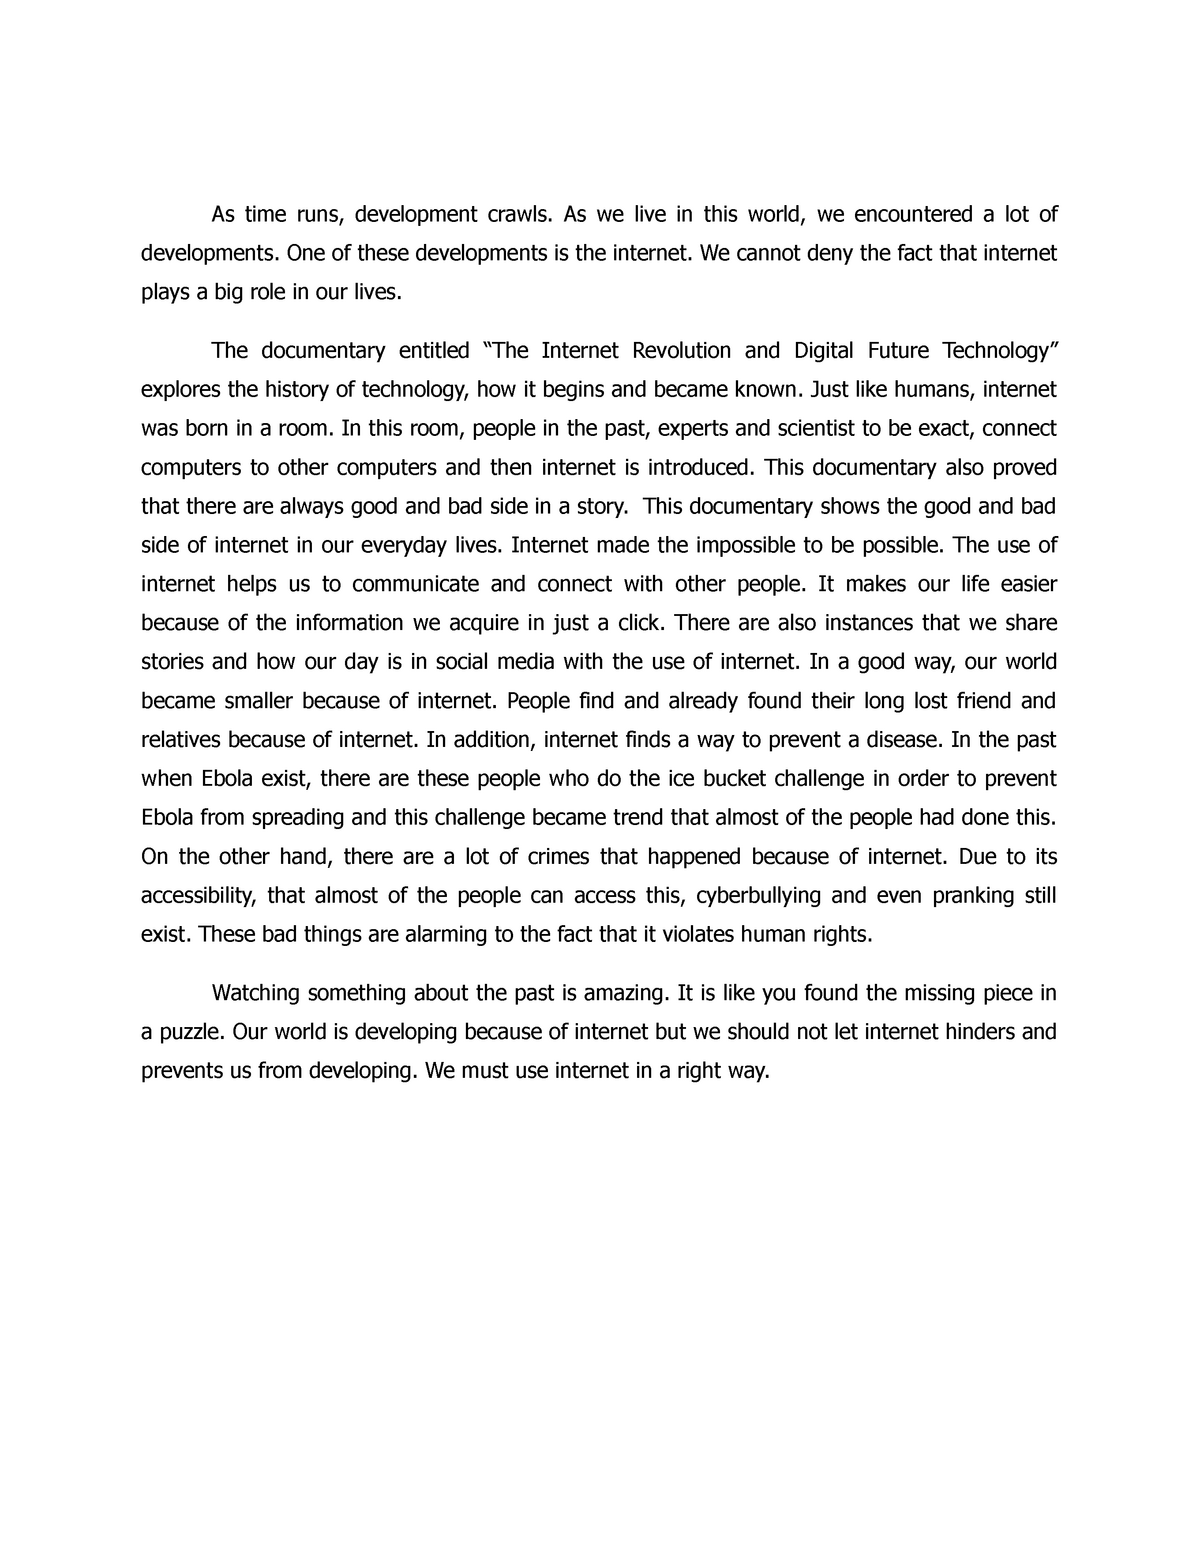 persuasive essay on reflection on technology and education